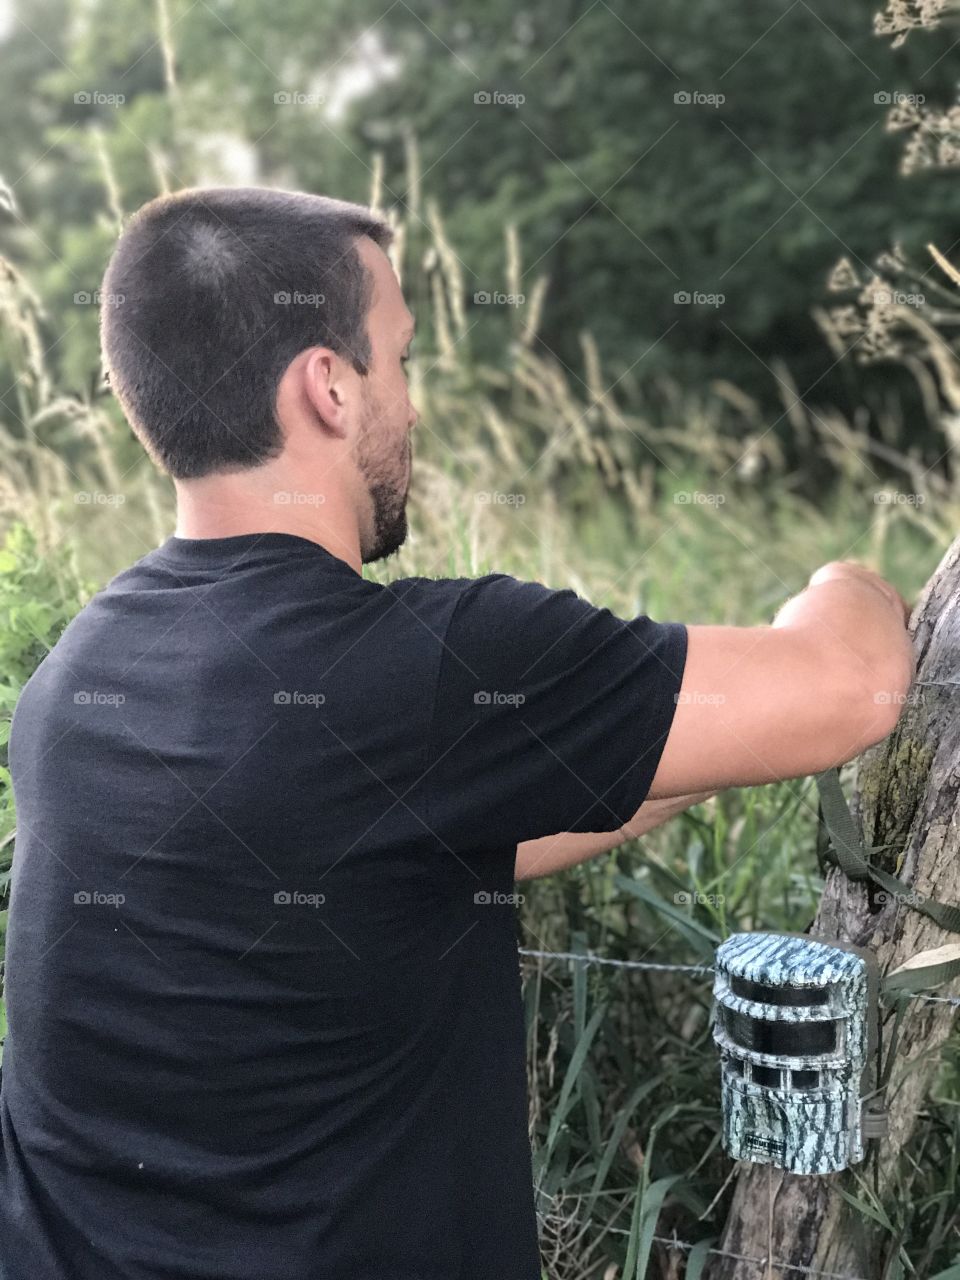 Setting up trail cameras 